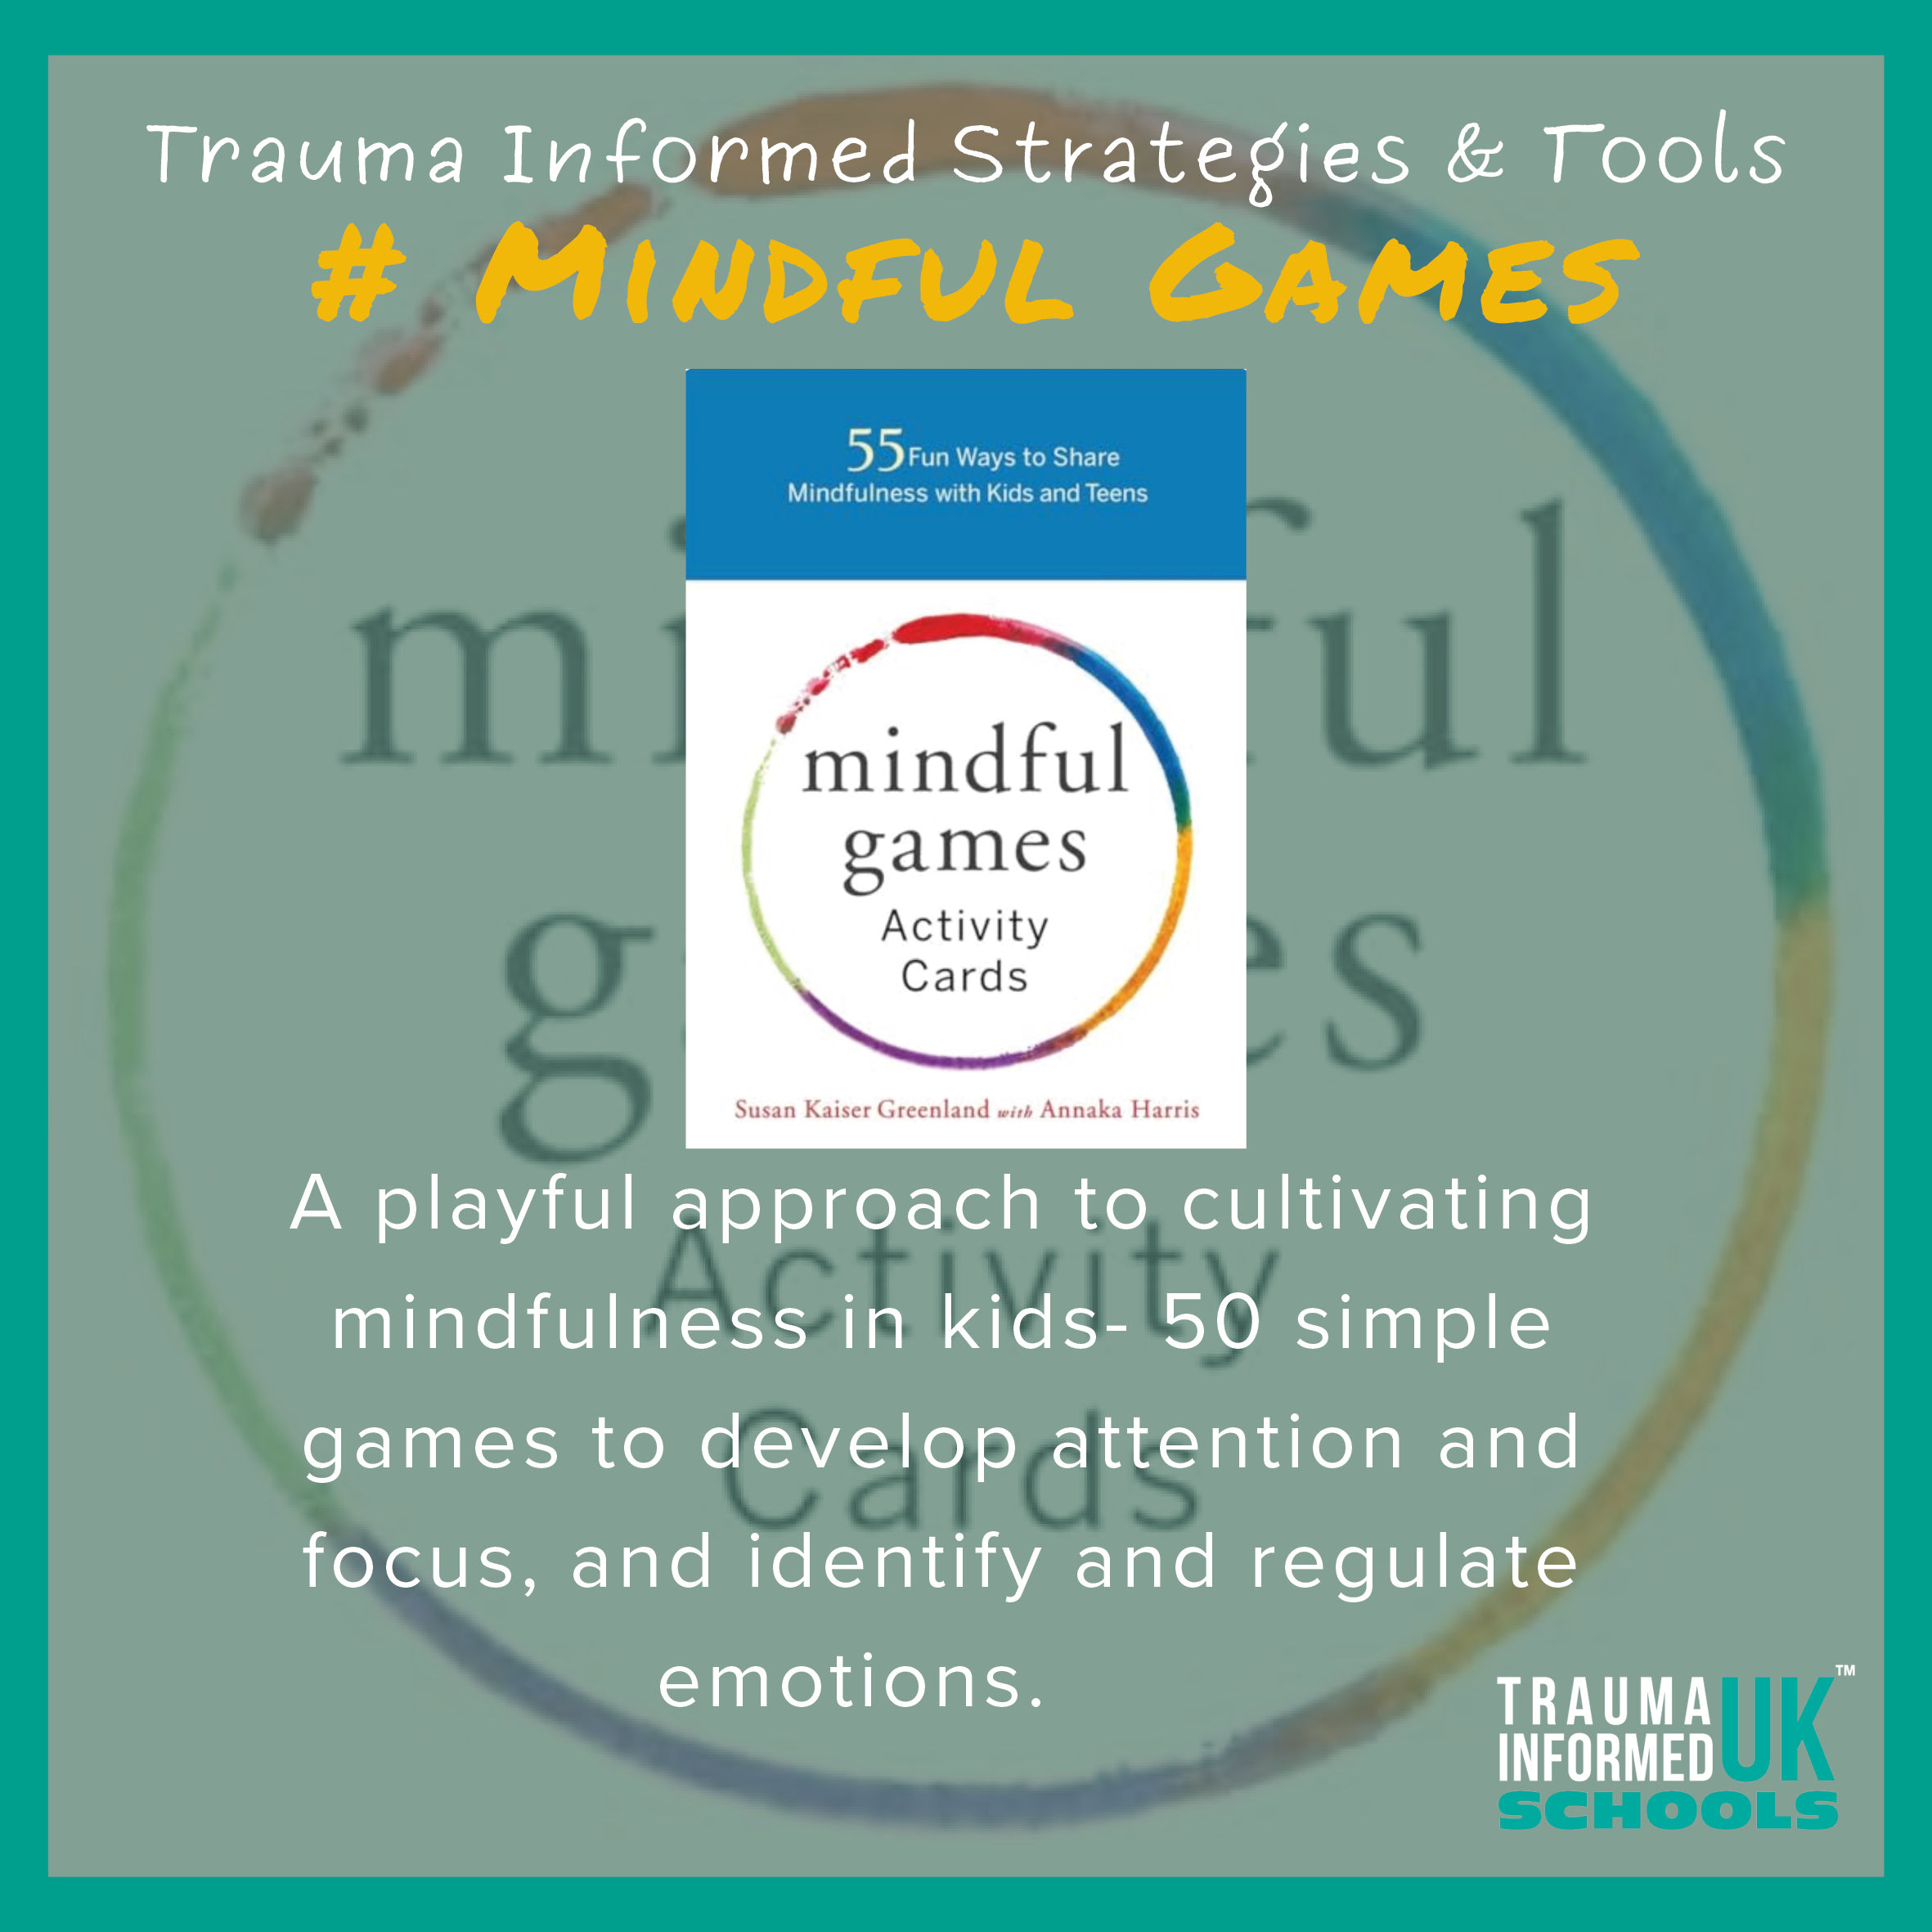 Trauma Informed Tools and Strategies Mindful Games